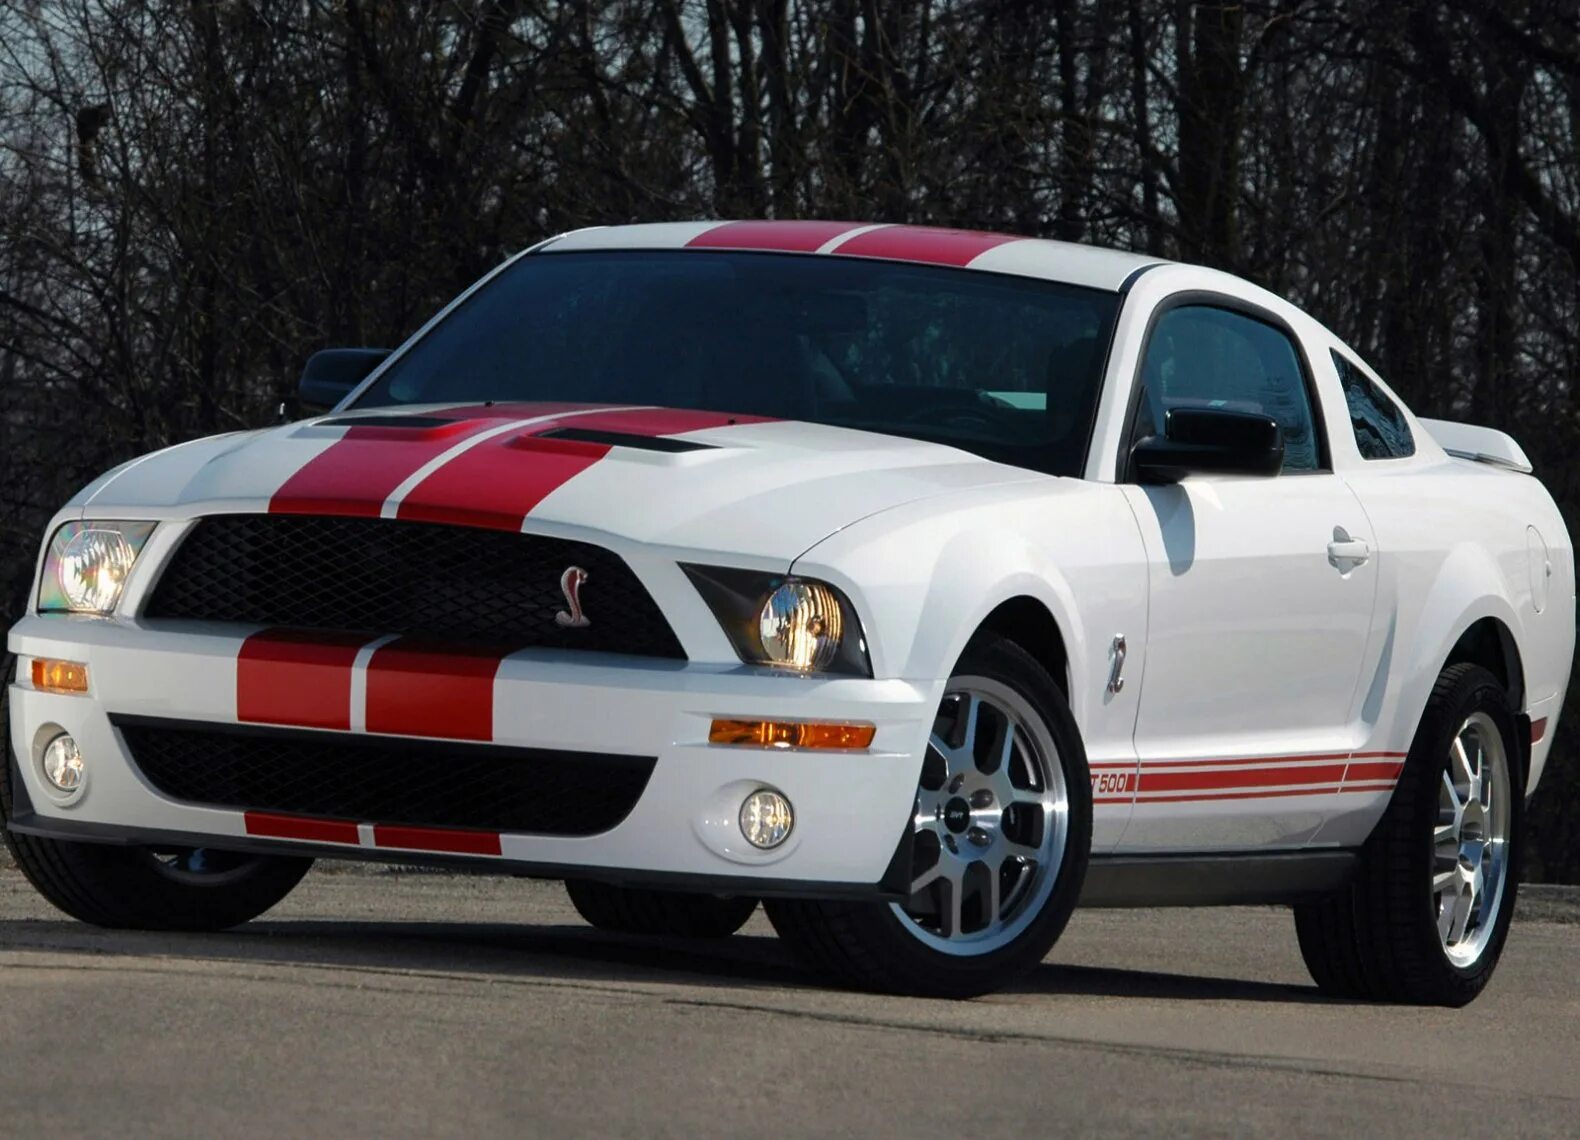 Mustang shelby gt. Форд Мустанг gt 500. Форд Шелби ГТ 500. Форд Мустанг Шелби gt 500. Ford Mustang Shelby gt500 2007.